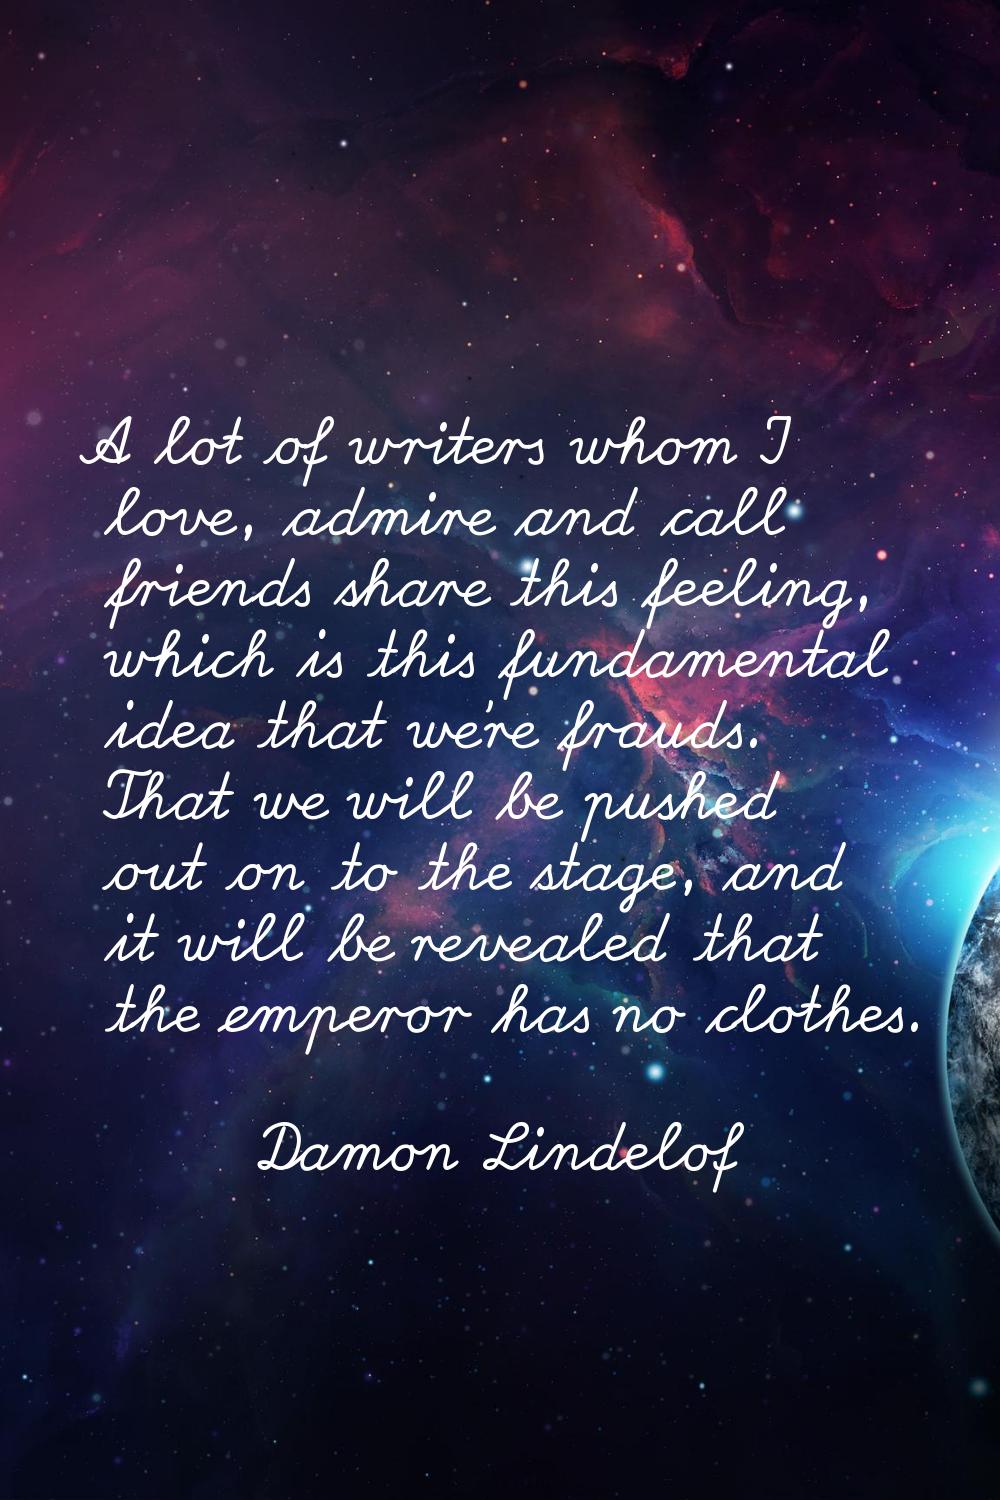 A lot of writers whom I love, admire and call friends share this feeling, which is this fundamental